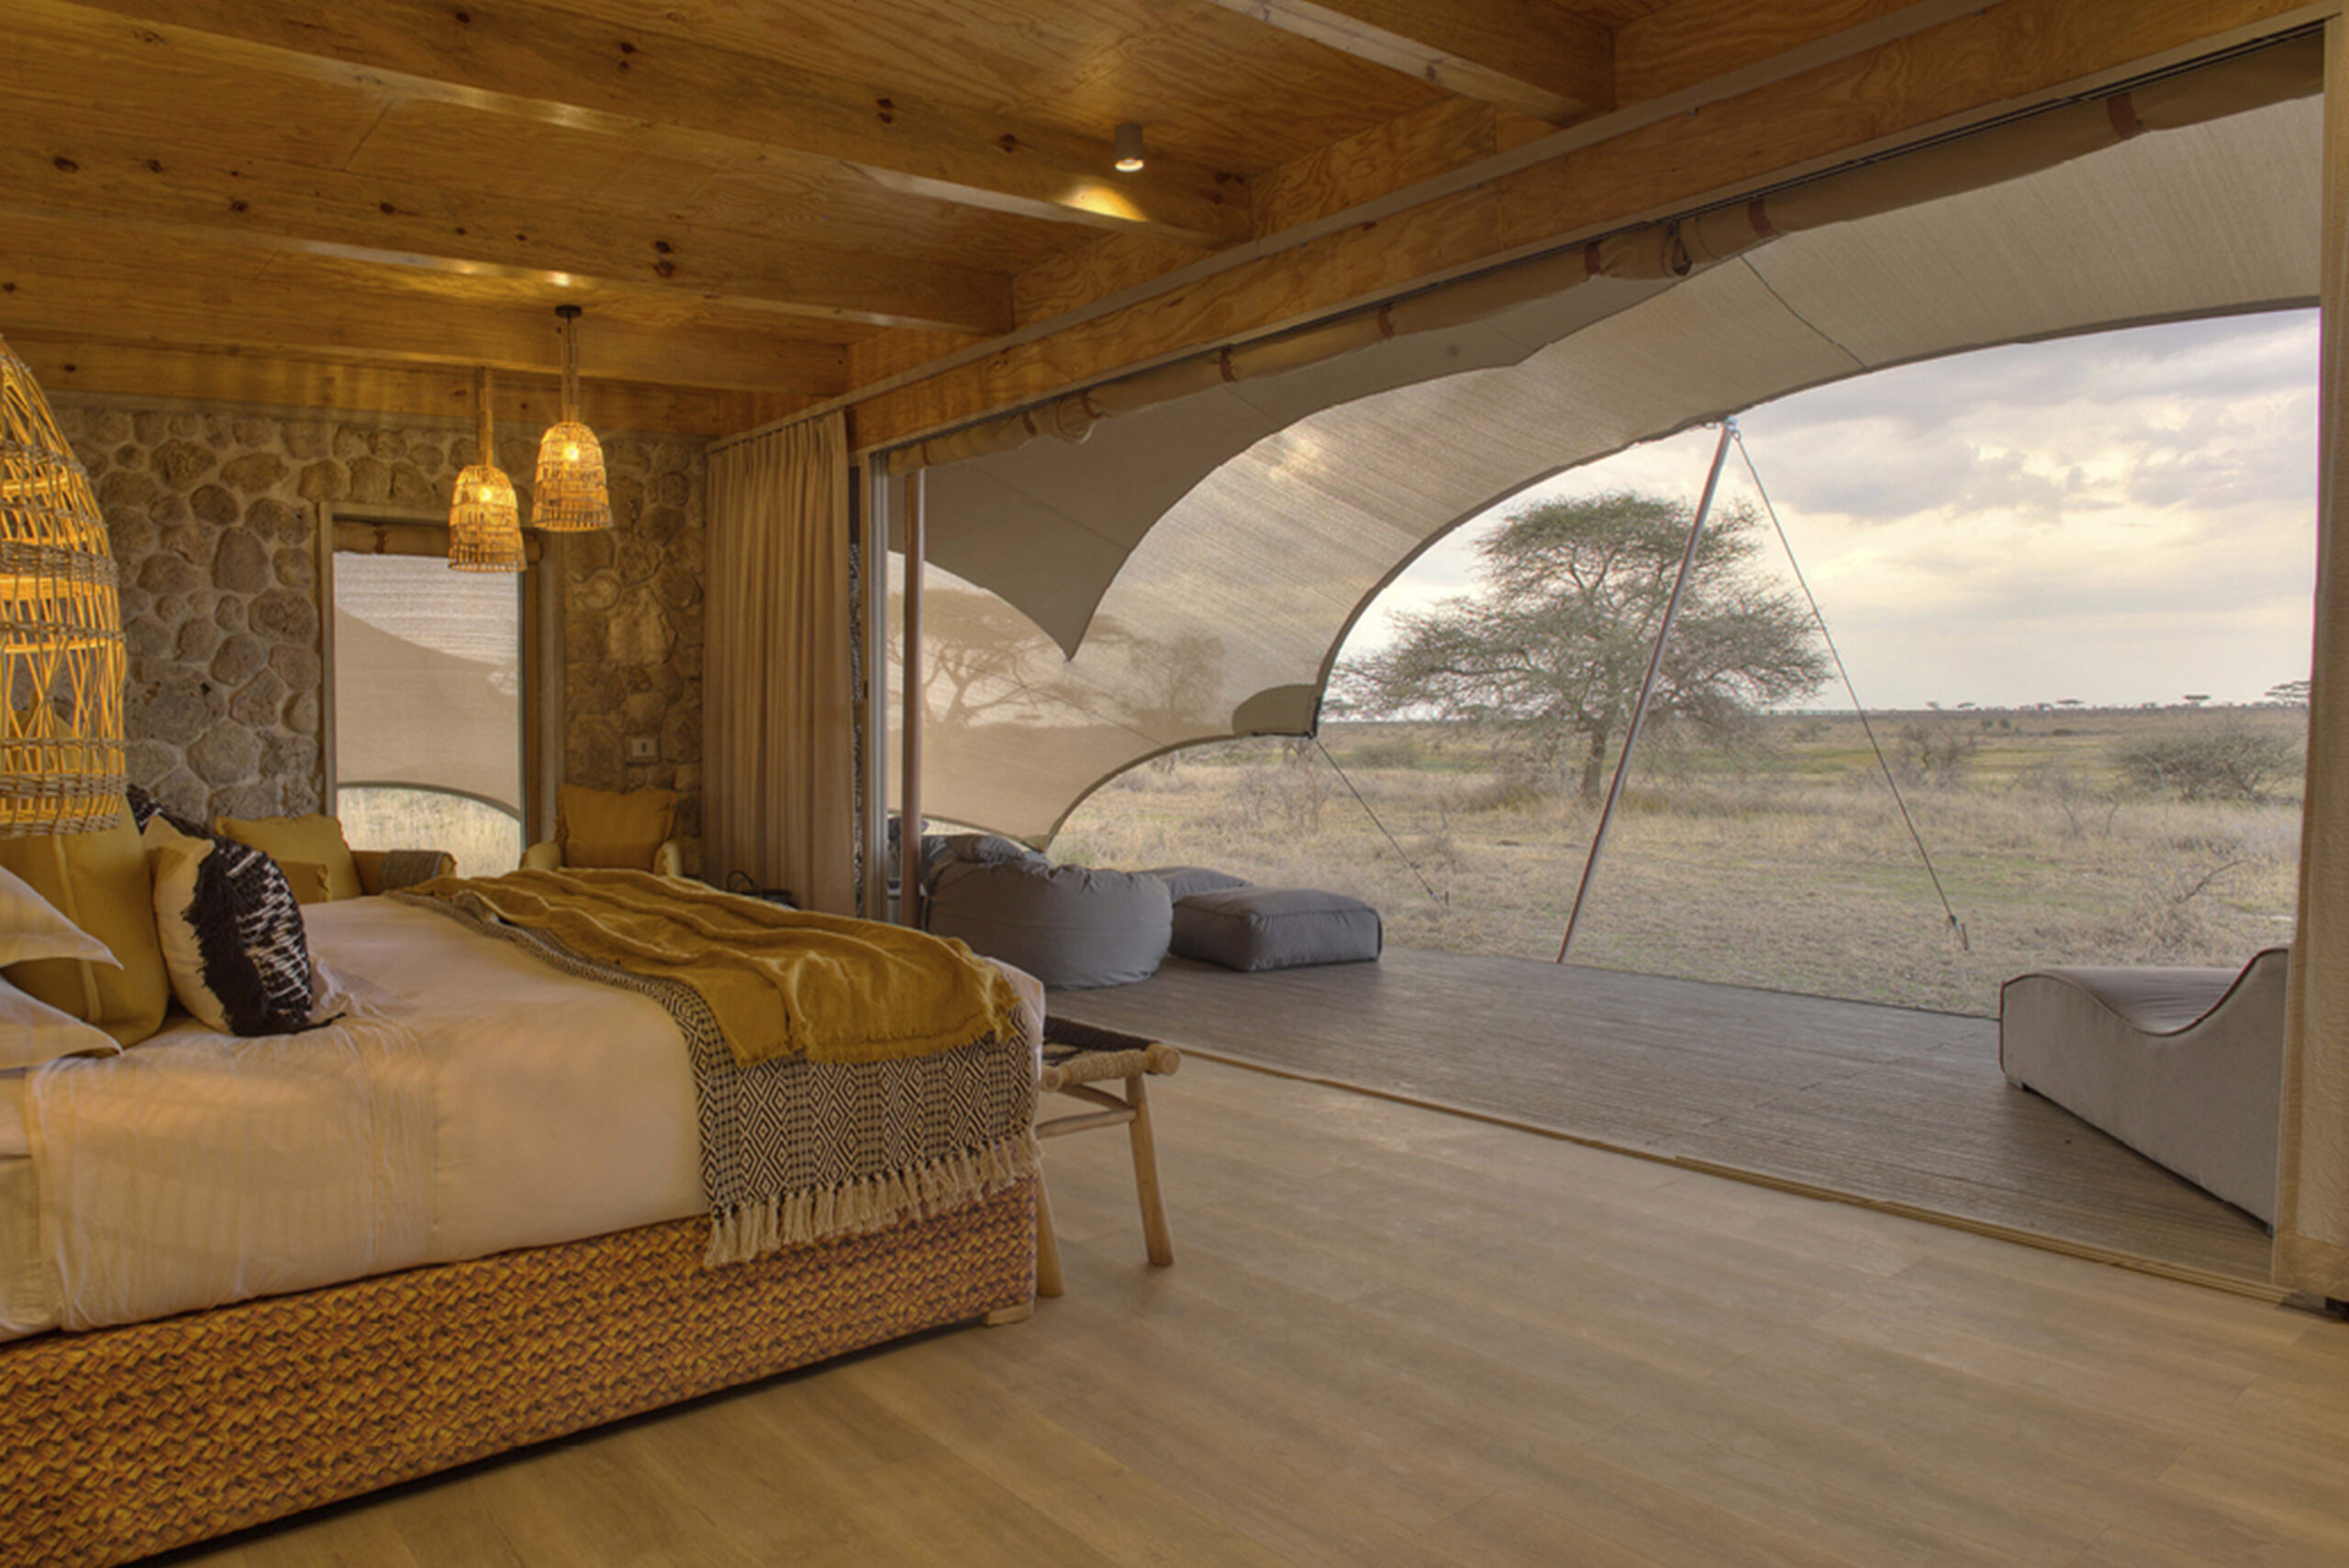 namiri_plains_-_tent_interior_looking_out_onto_the_plains